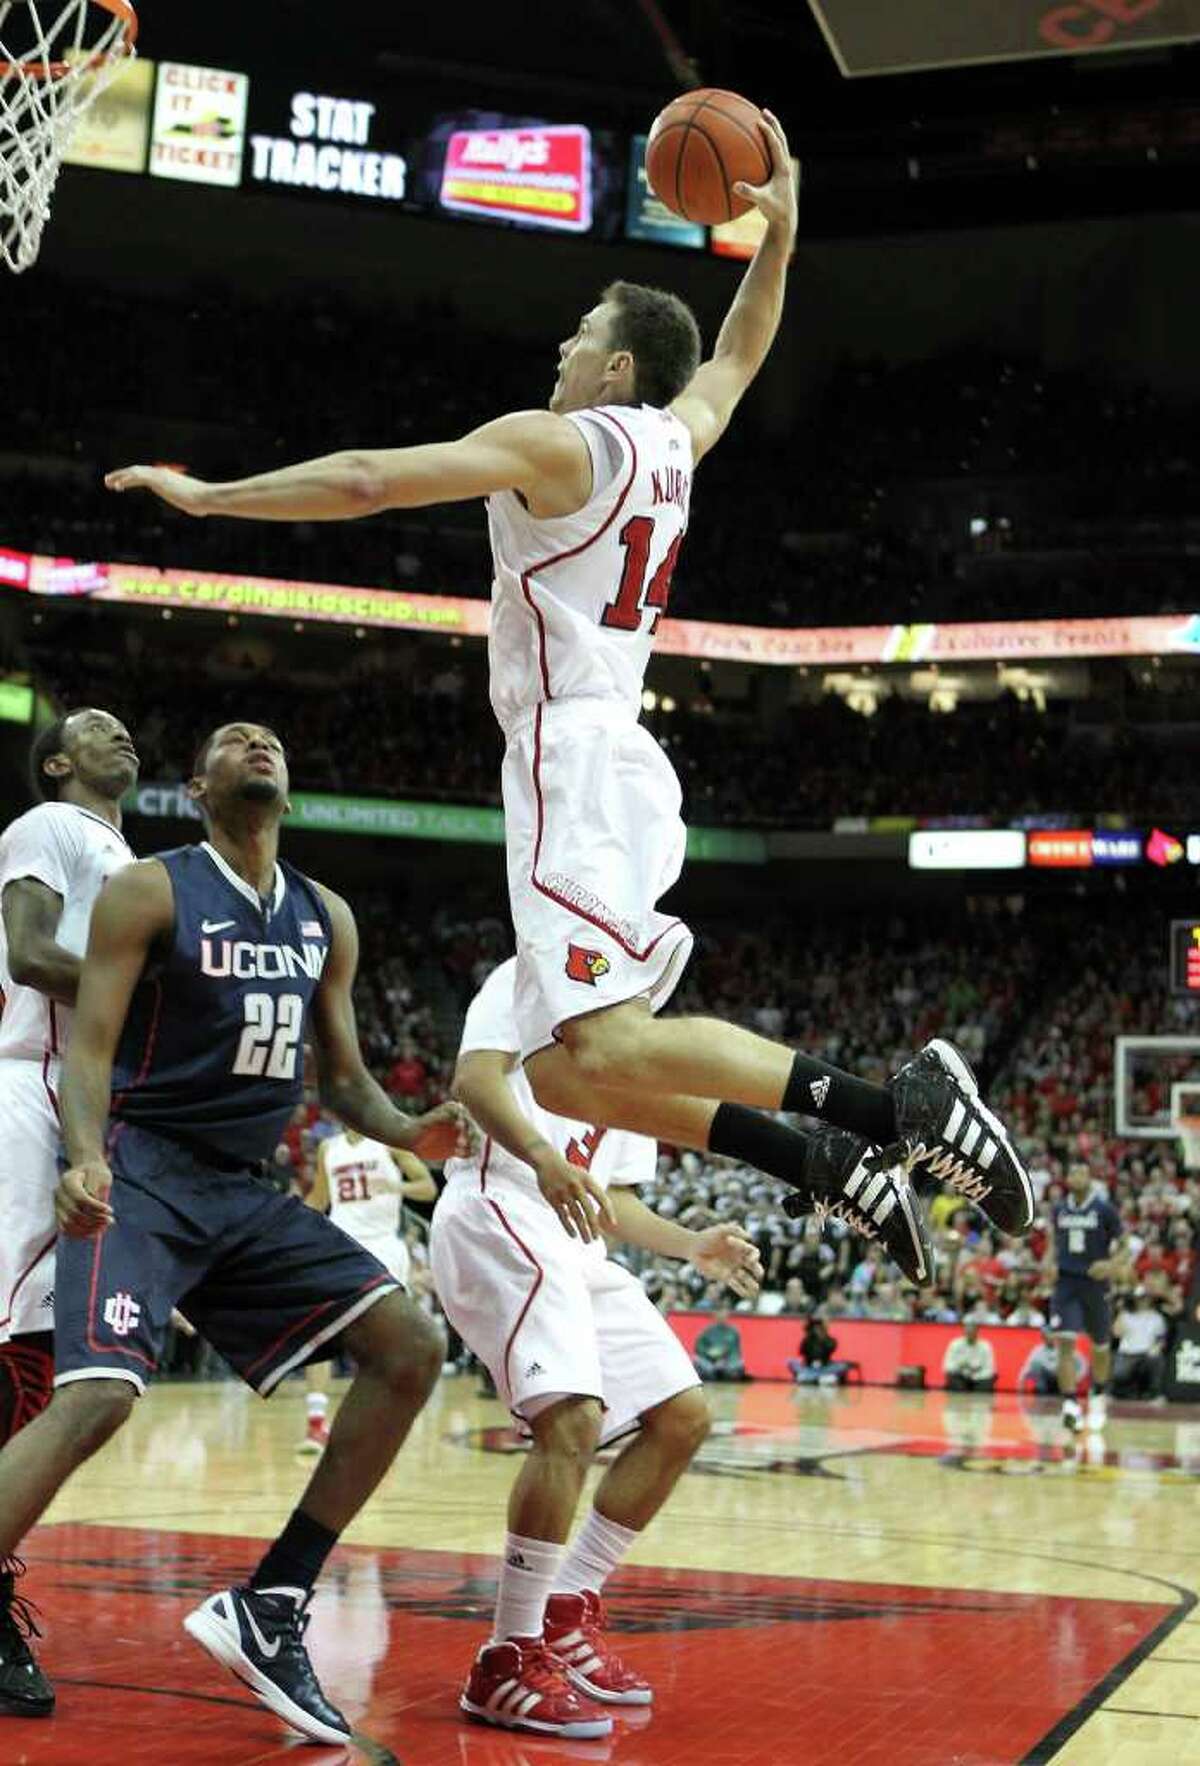 LOUISVILLE, KY - FEBRUARY 06: Kyle Kuric #14 of the Louisville Cardinals shoots the ball during the Big East Conference game against the Connecticut Huskies at KFC YUM! Center on February 6, 2012 in Louisville, Kentucky. (Photo by Andy Lyons/Getty Images)